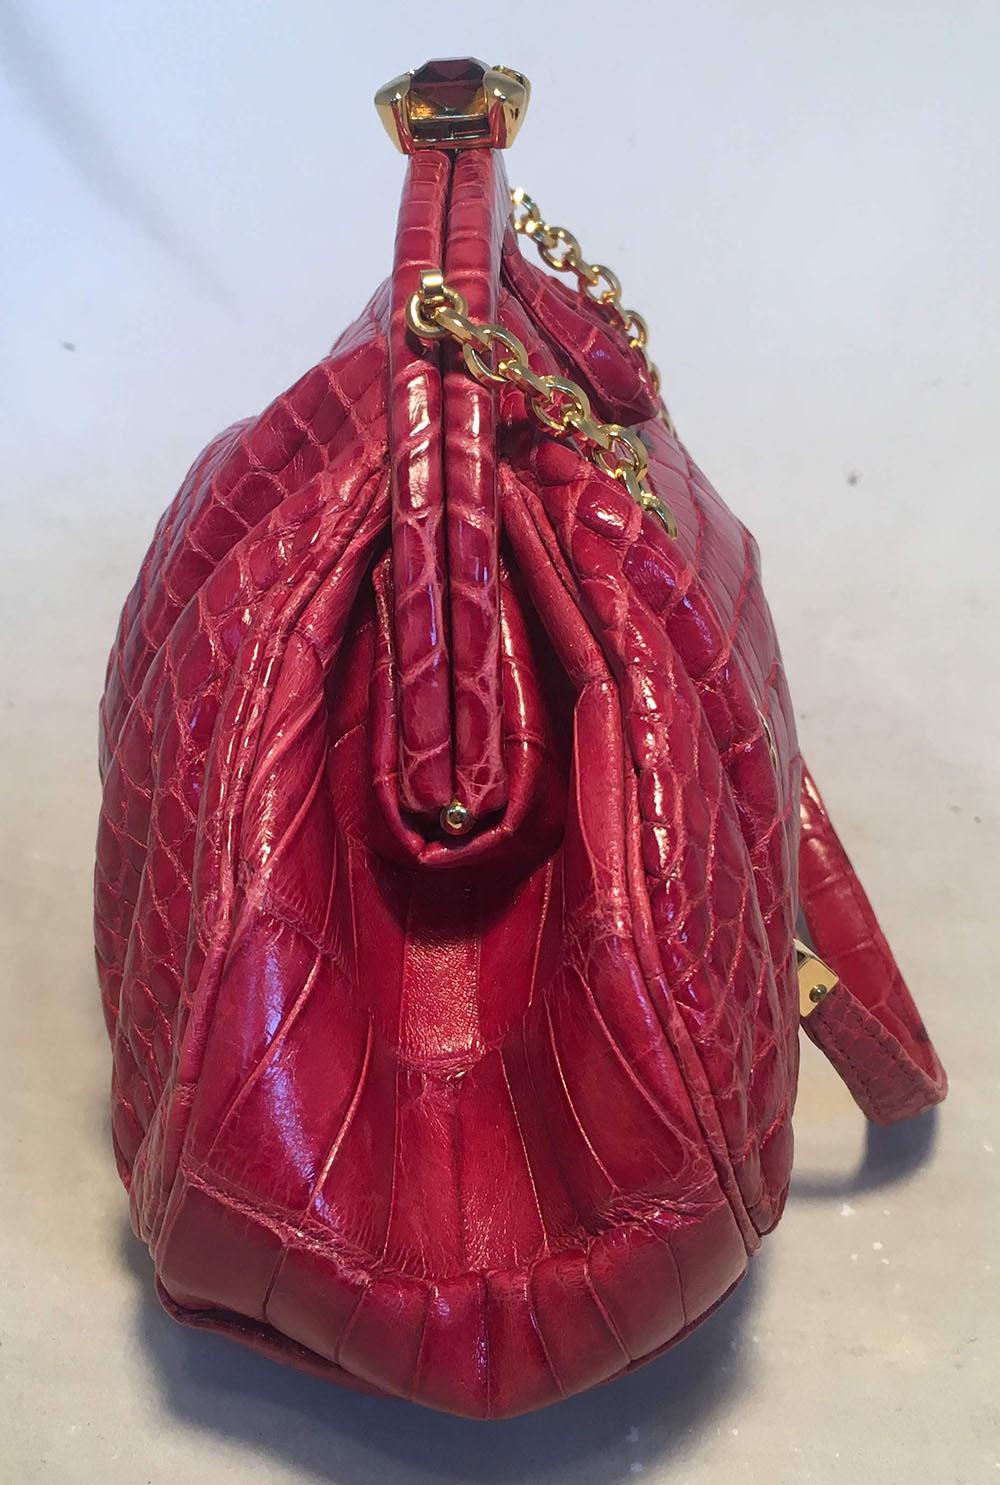 BEAUTIFUL Judith Leiber Small Red Alligator Handbag in excellent condition. Red alligator leather exterior trimmed with gold hardware and a top glass gemstone closure. Red satin interior with one slit and one zipped side pockets. Matching silk mini